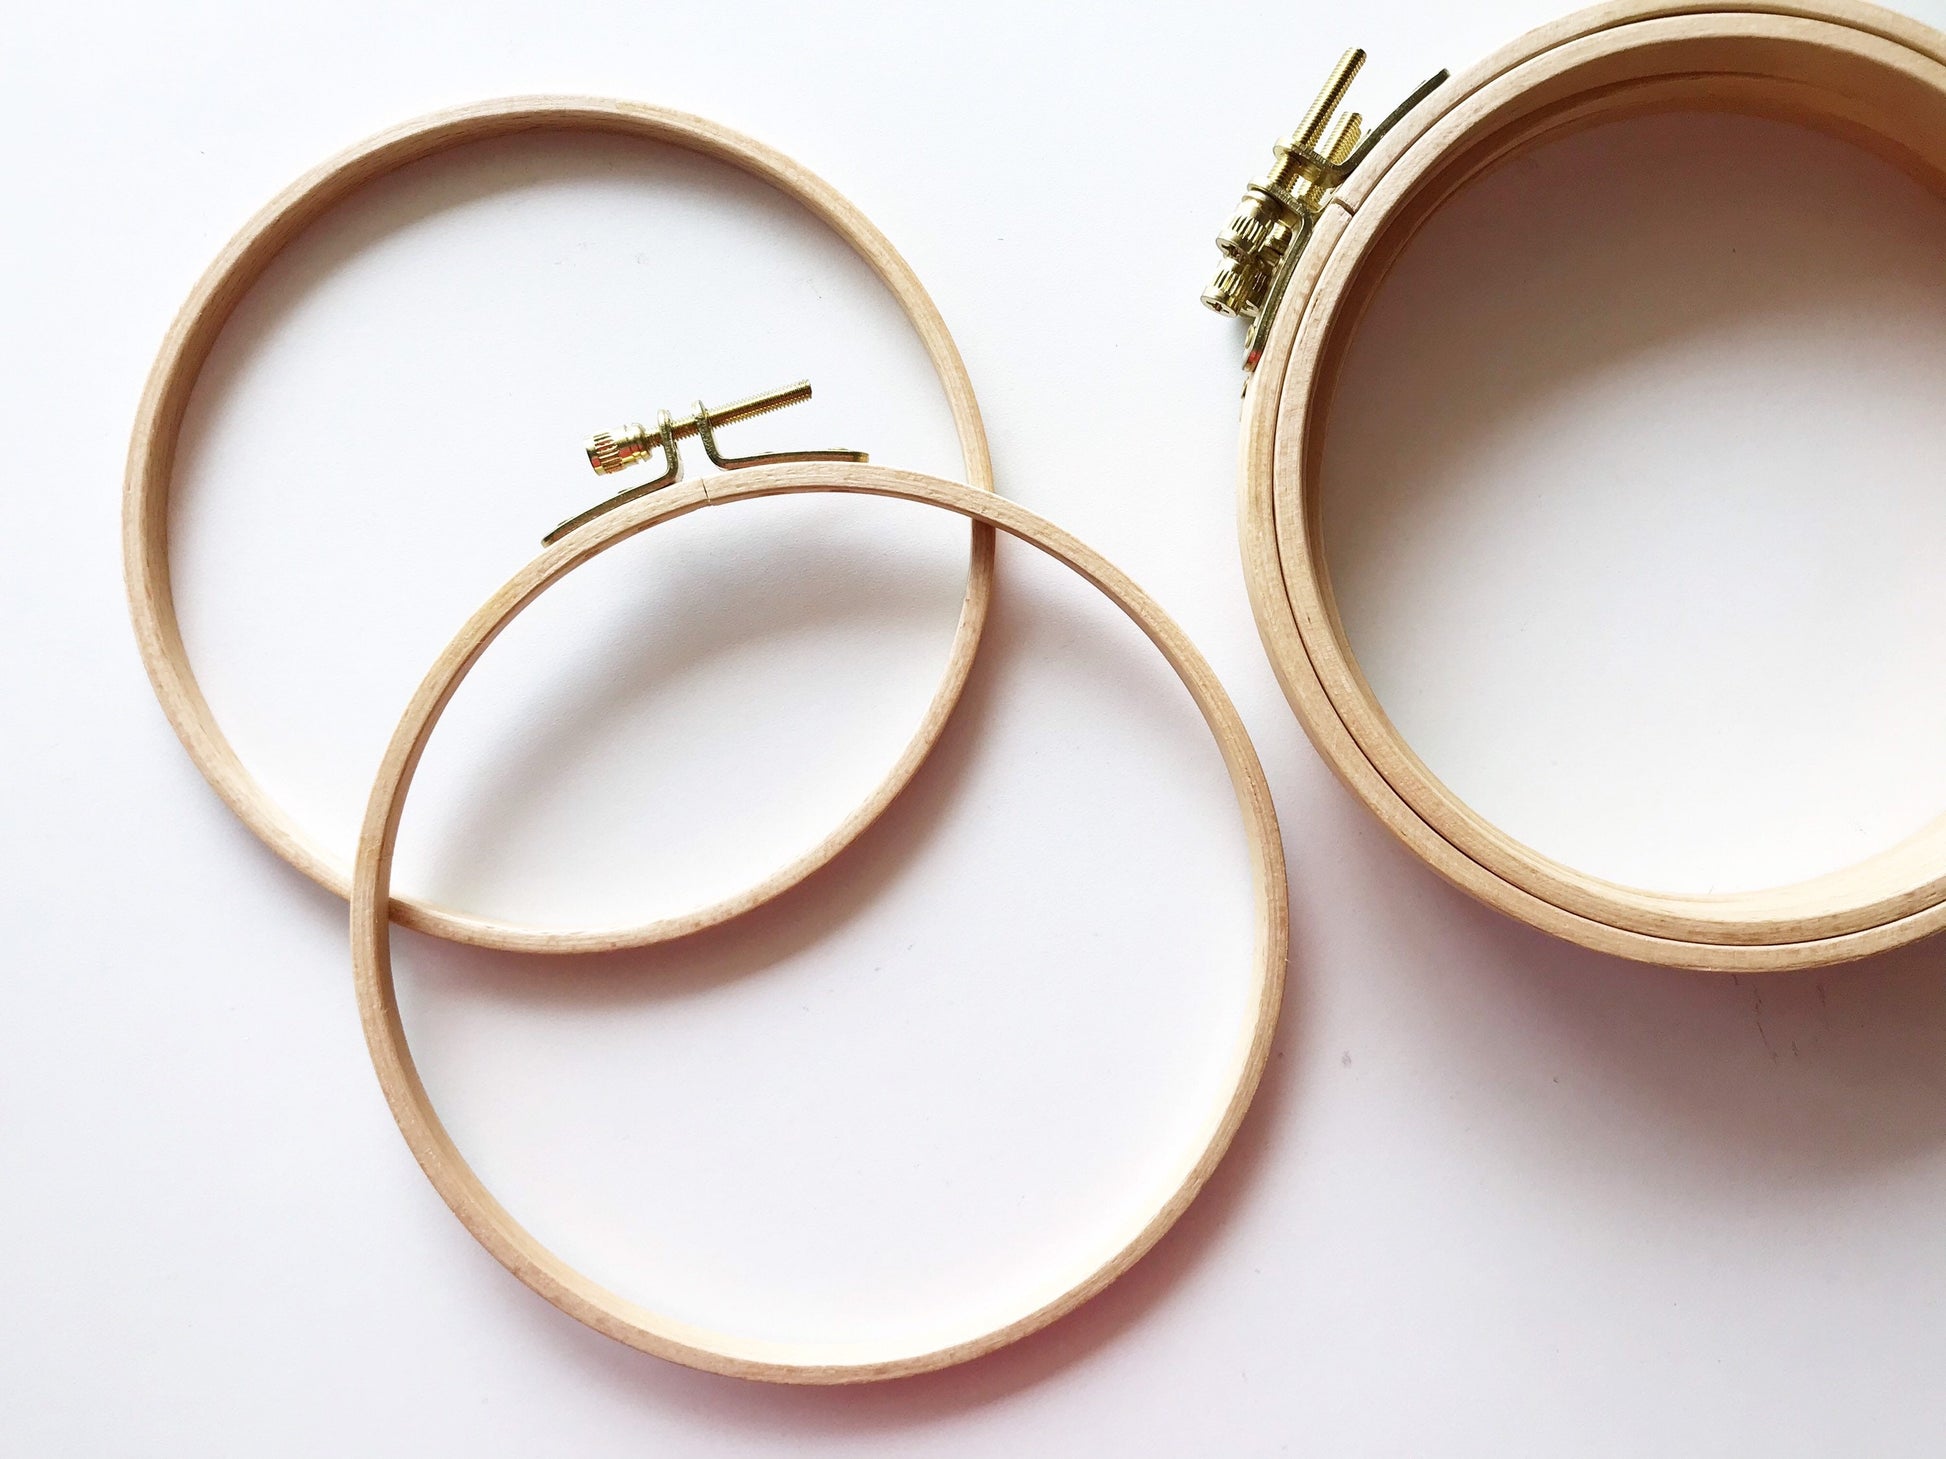 Beech Wood Embroidery Hoop, 2 Packs 9 Inch Cross Stitch Hoops, Round  Embroidery Frame for Art Craft Sewing and Decorative Hanging